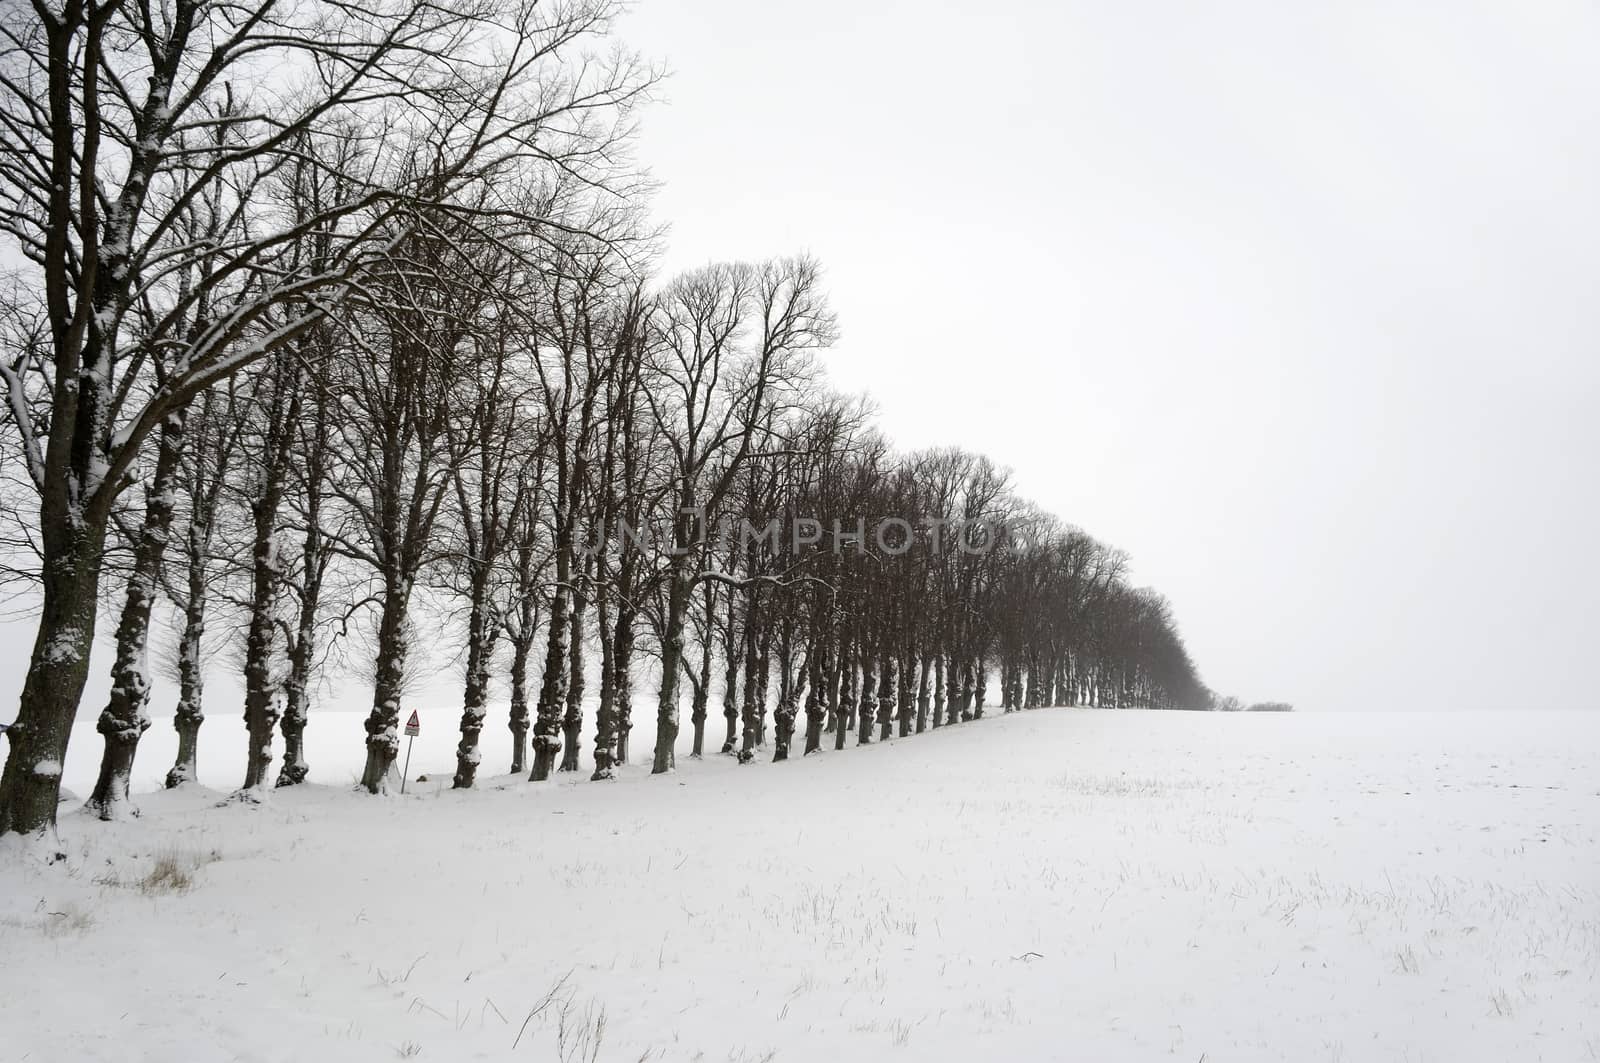 Line of trees at winter time